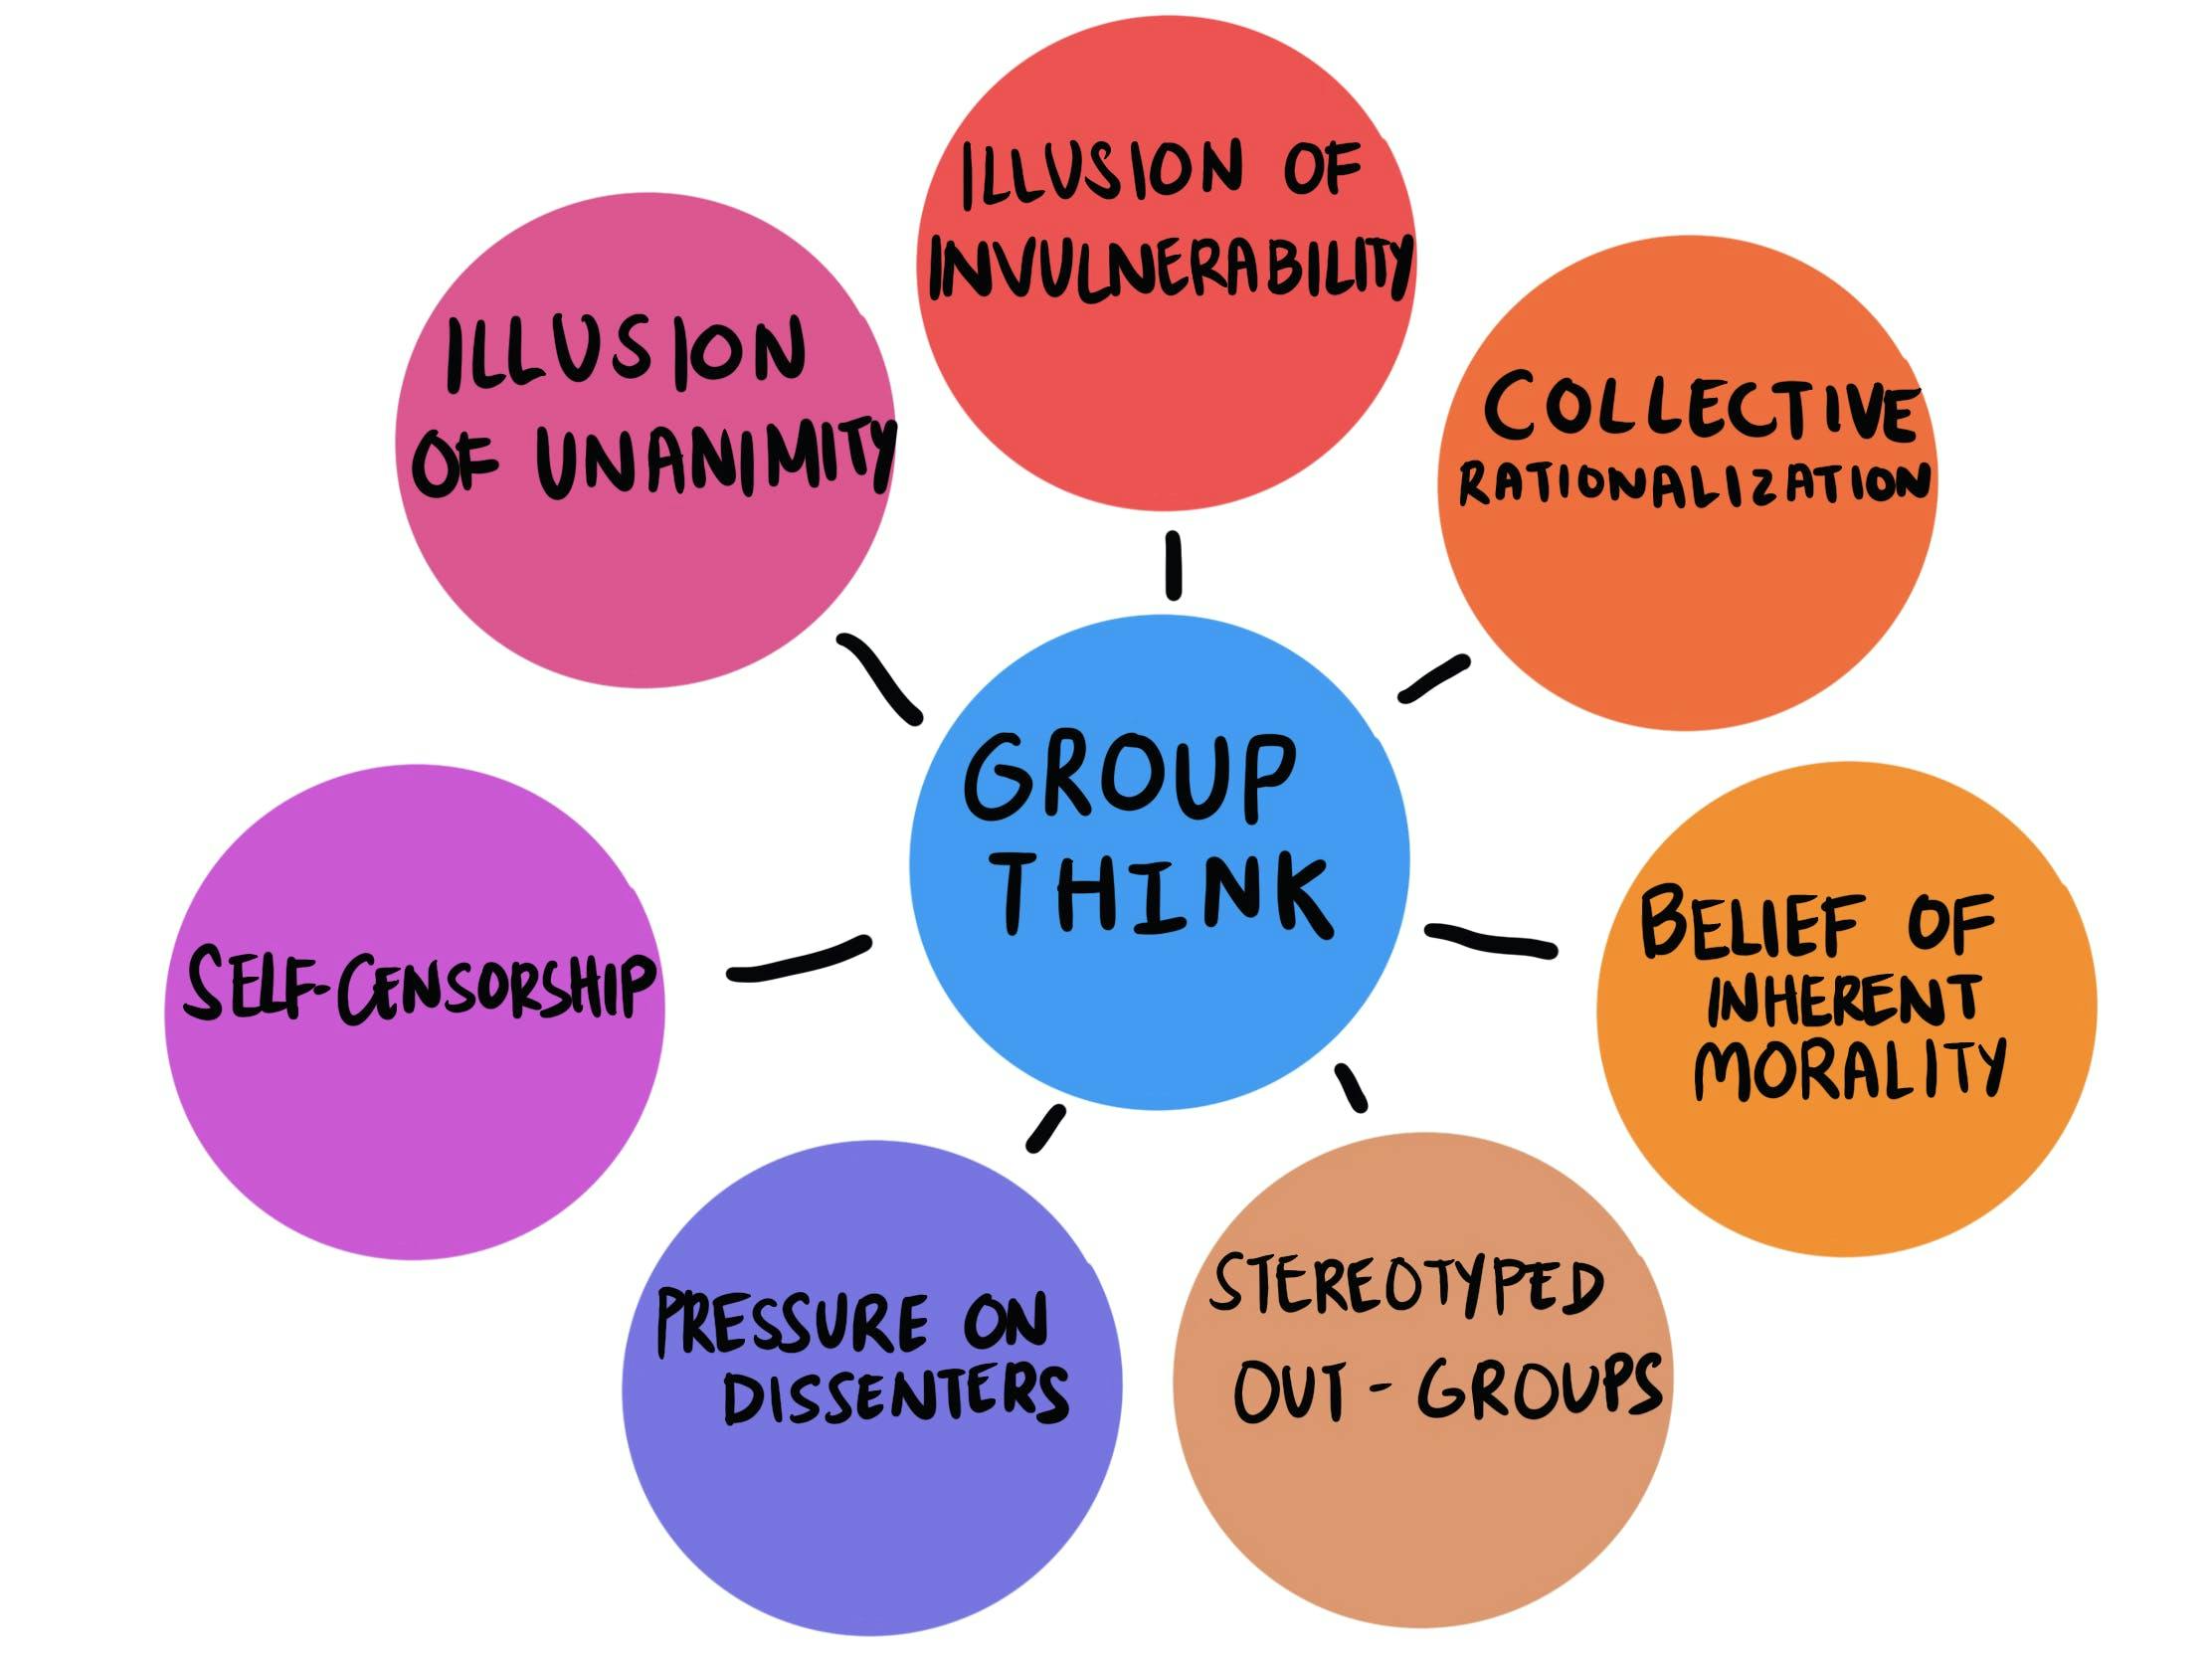 A bubble labelled 'groupthink' connecting to seven other bubbles: illusion of invulnerability, collective rationalization, belief of inherent morality, stereotyped out-groups, pressure on dissenters, self-censorship, illusion of unanimity.